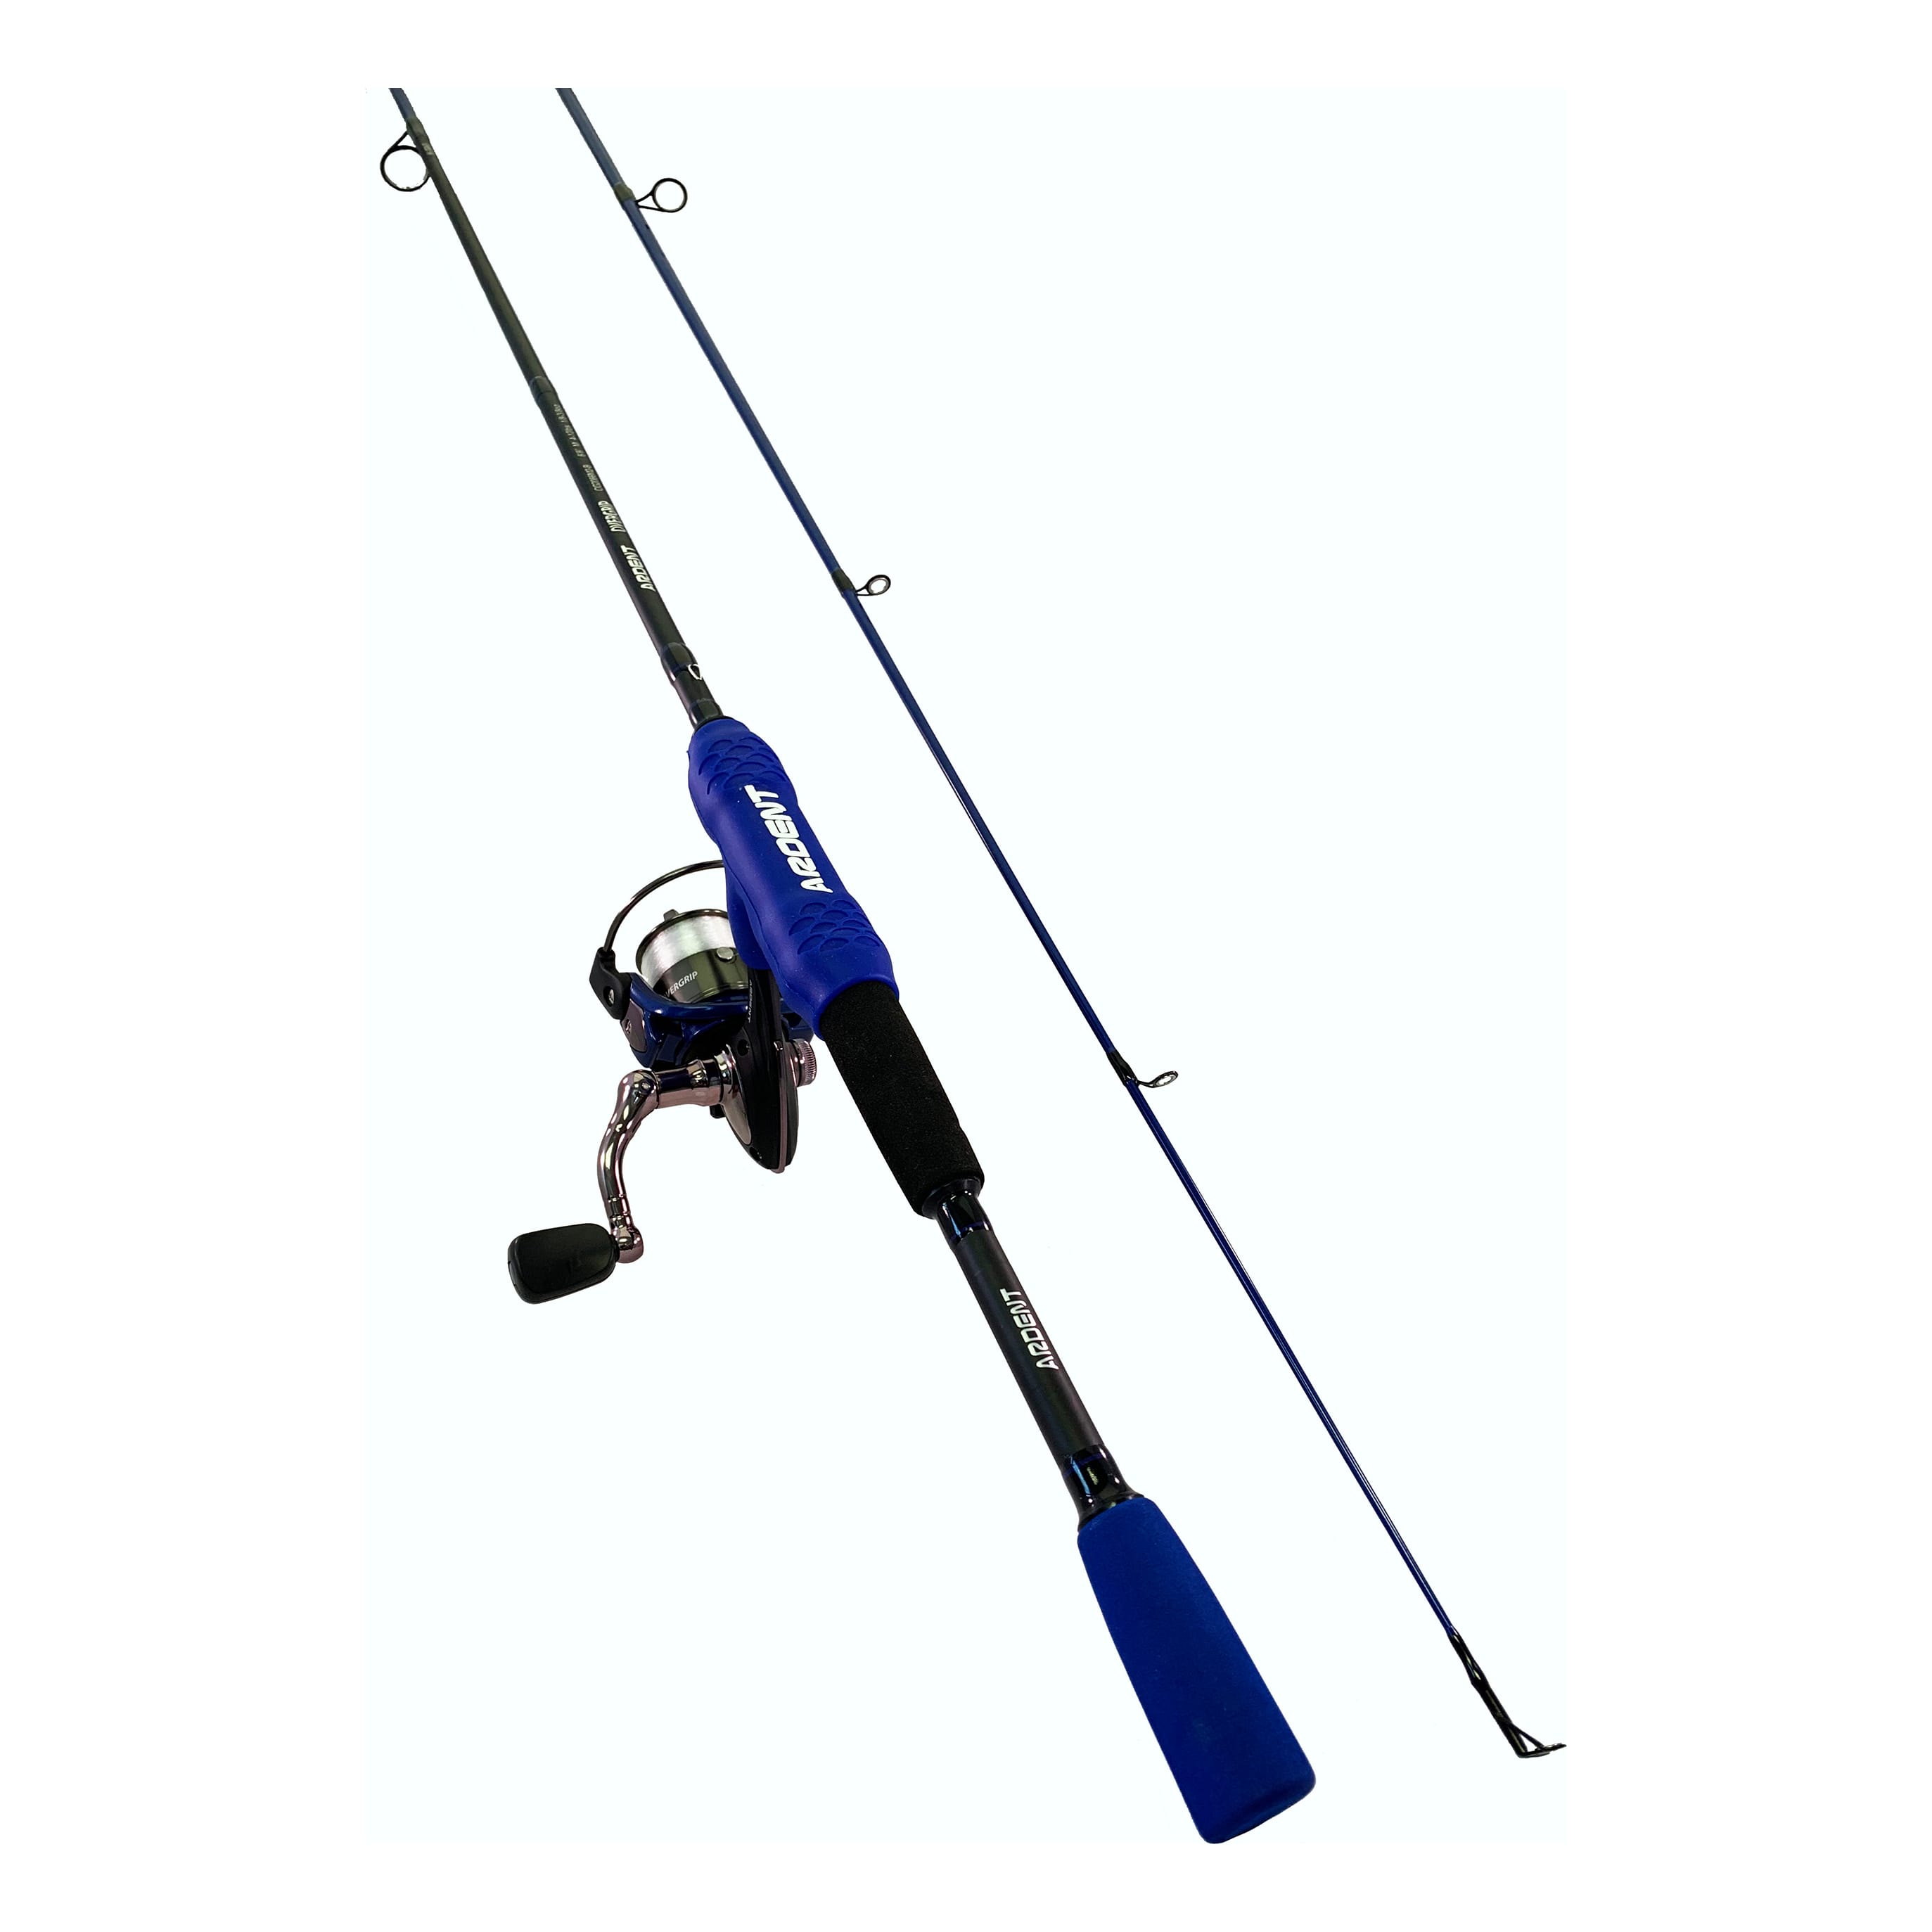 Bass Pro Shops® Quick Draw Telescopic Spinning Combo